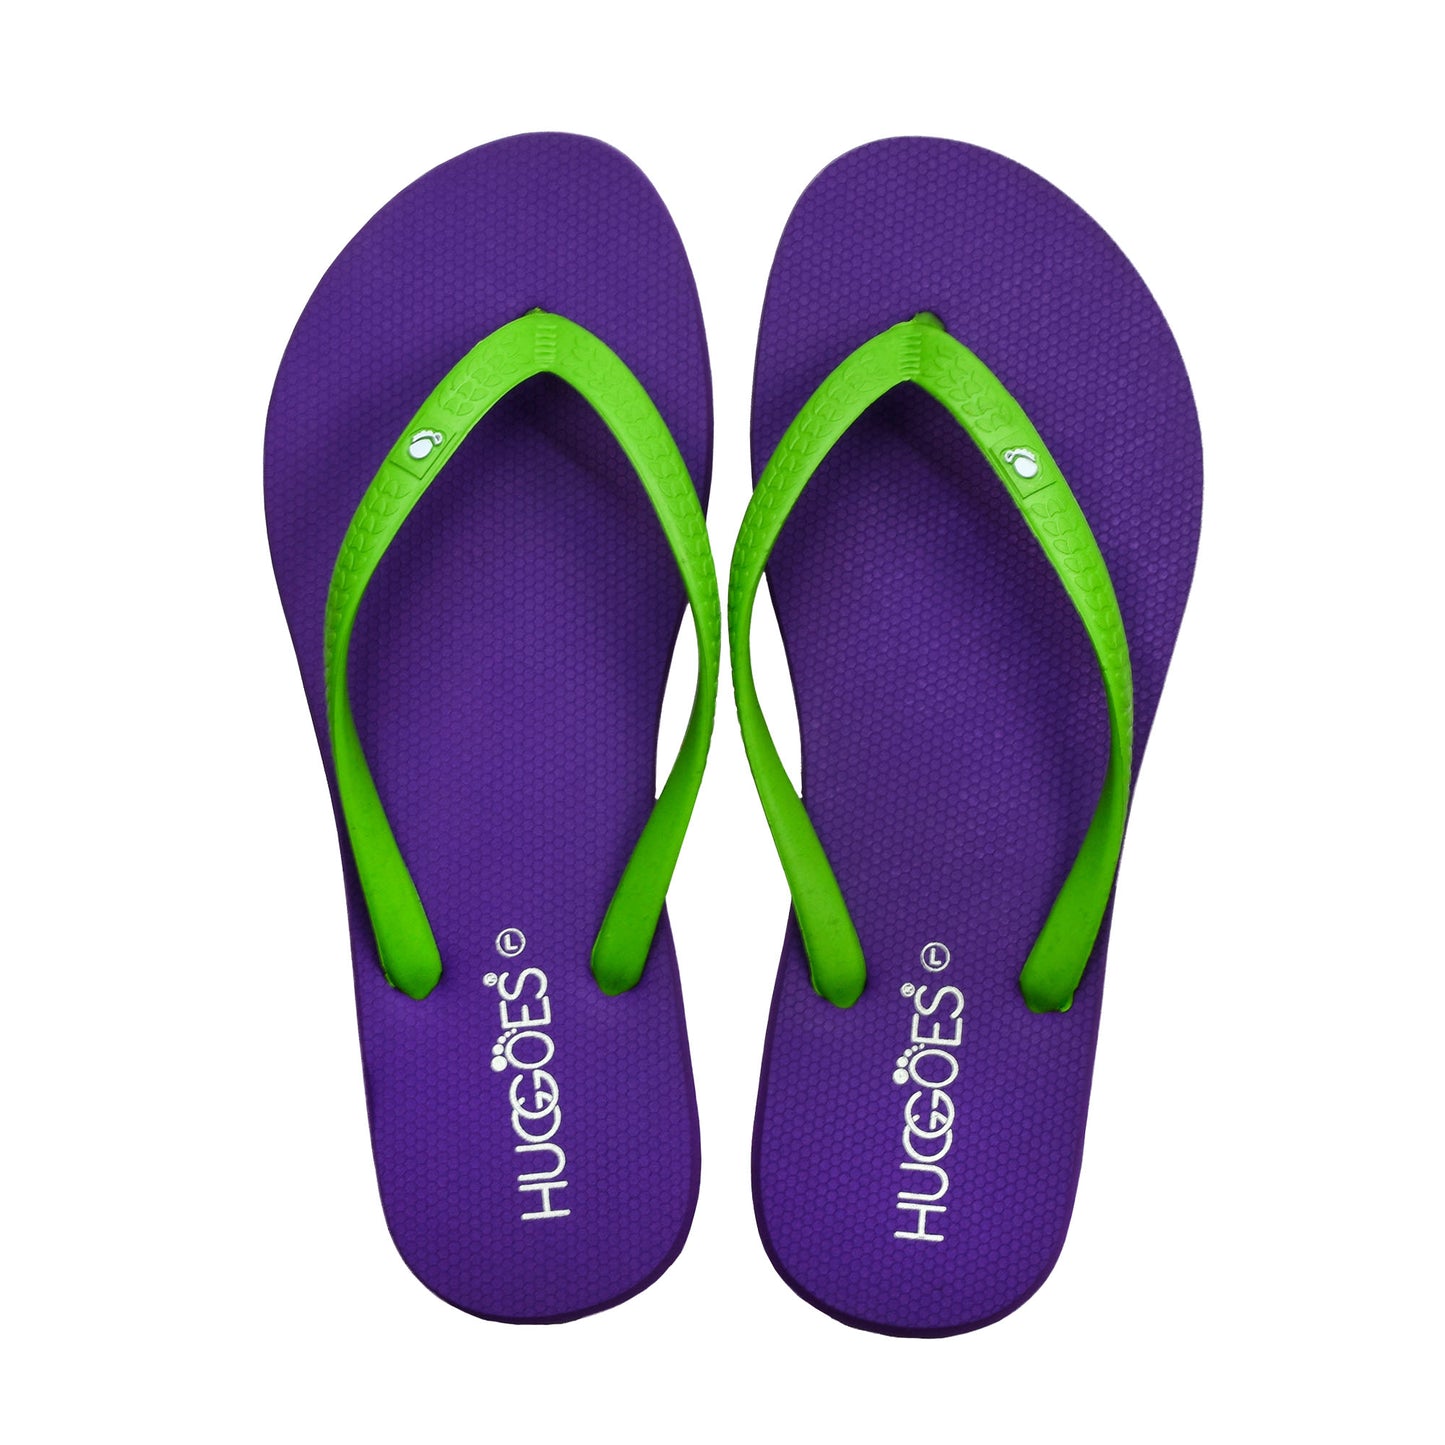 Huggoes by Aerothotic - Lilac Women's Flip Flops Slippers - Original Thailand Imported - (VL1)